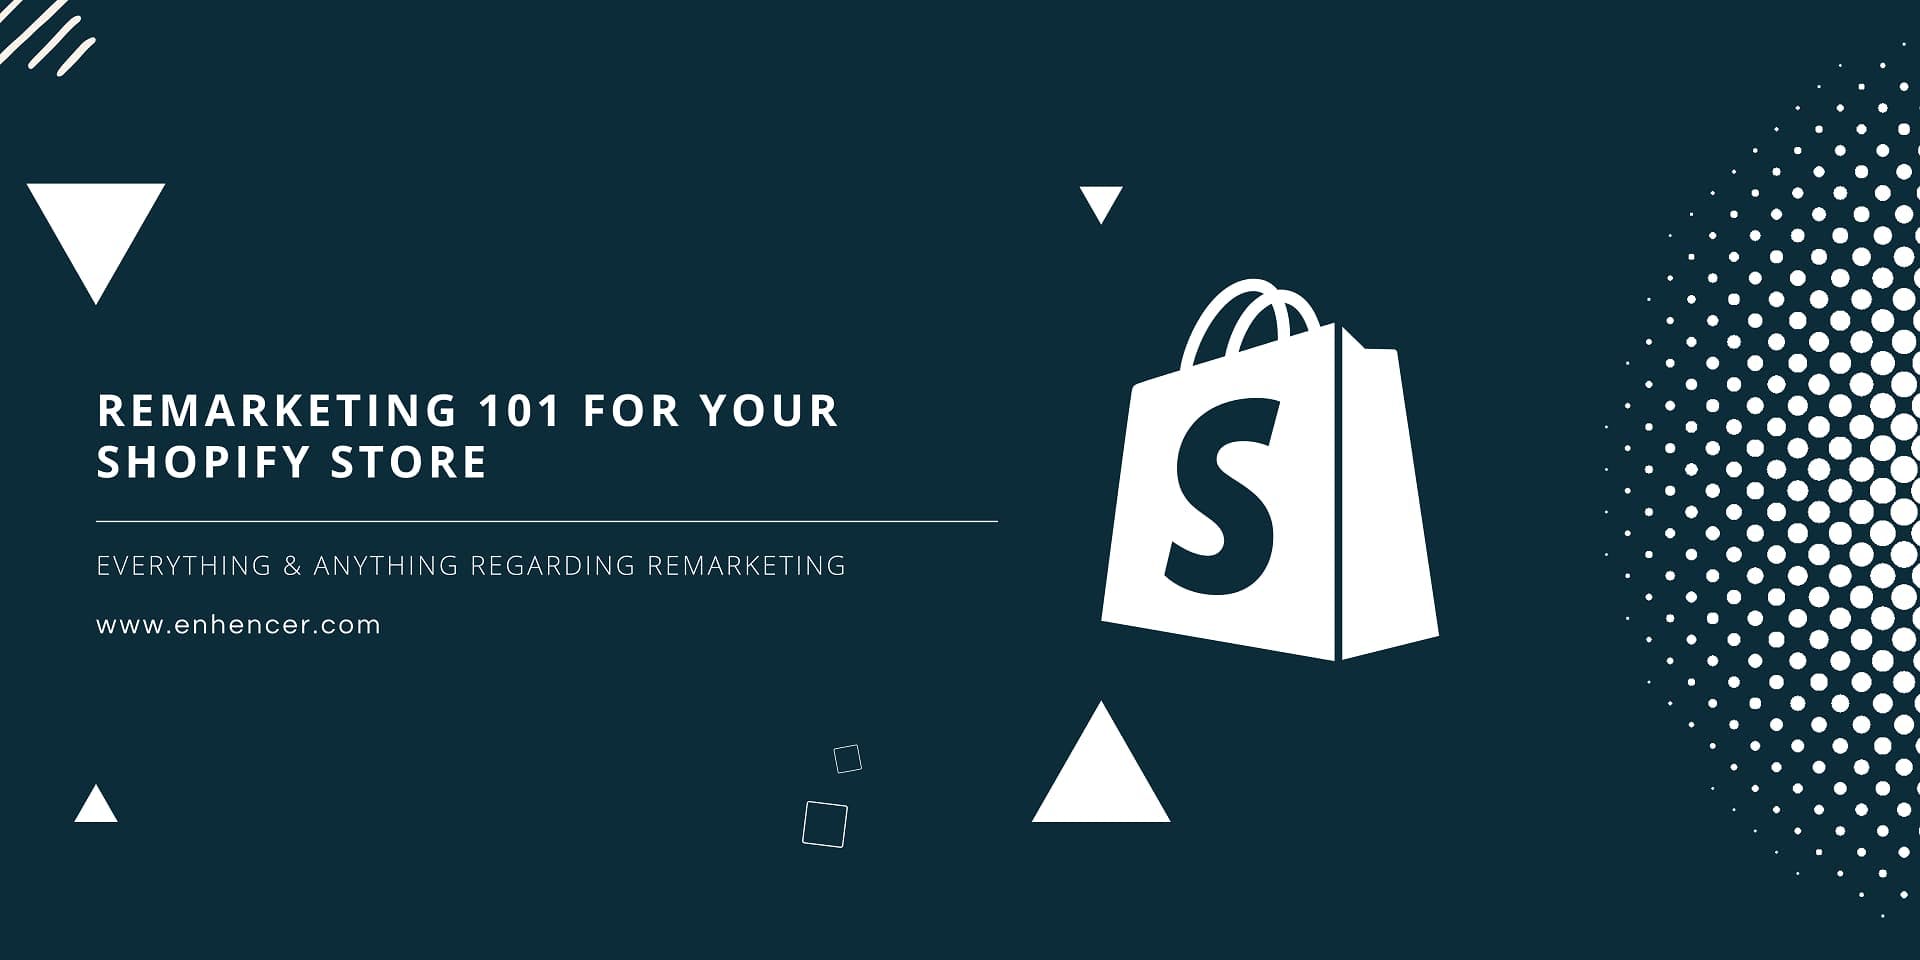 Remarketing 101 for your Shopify Store